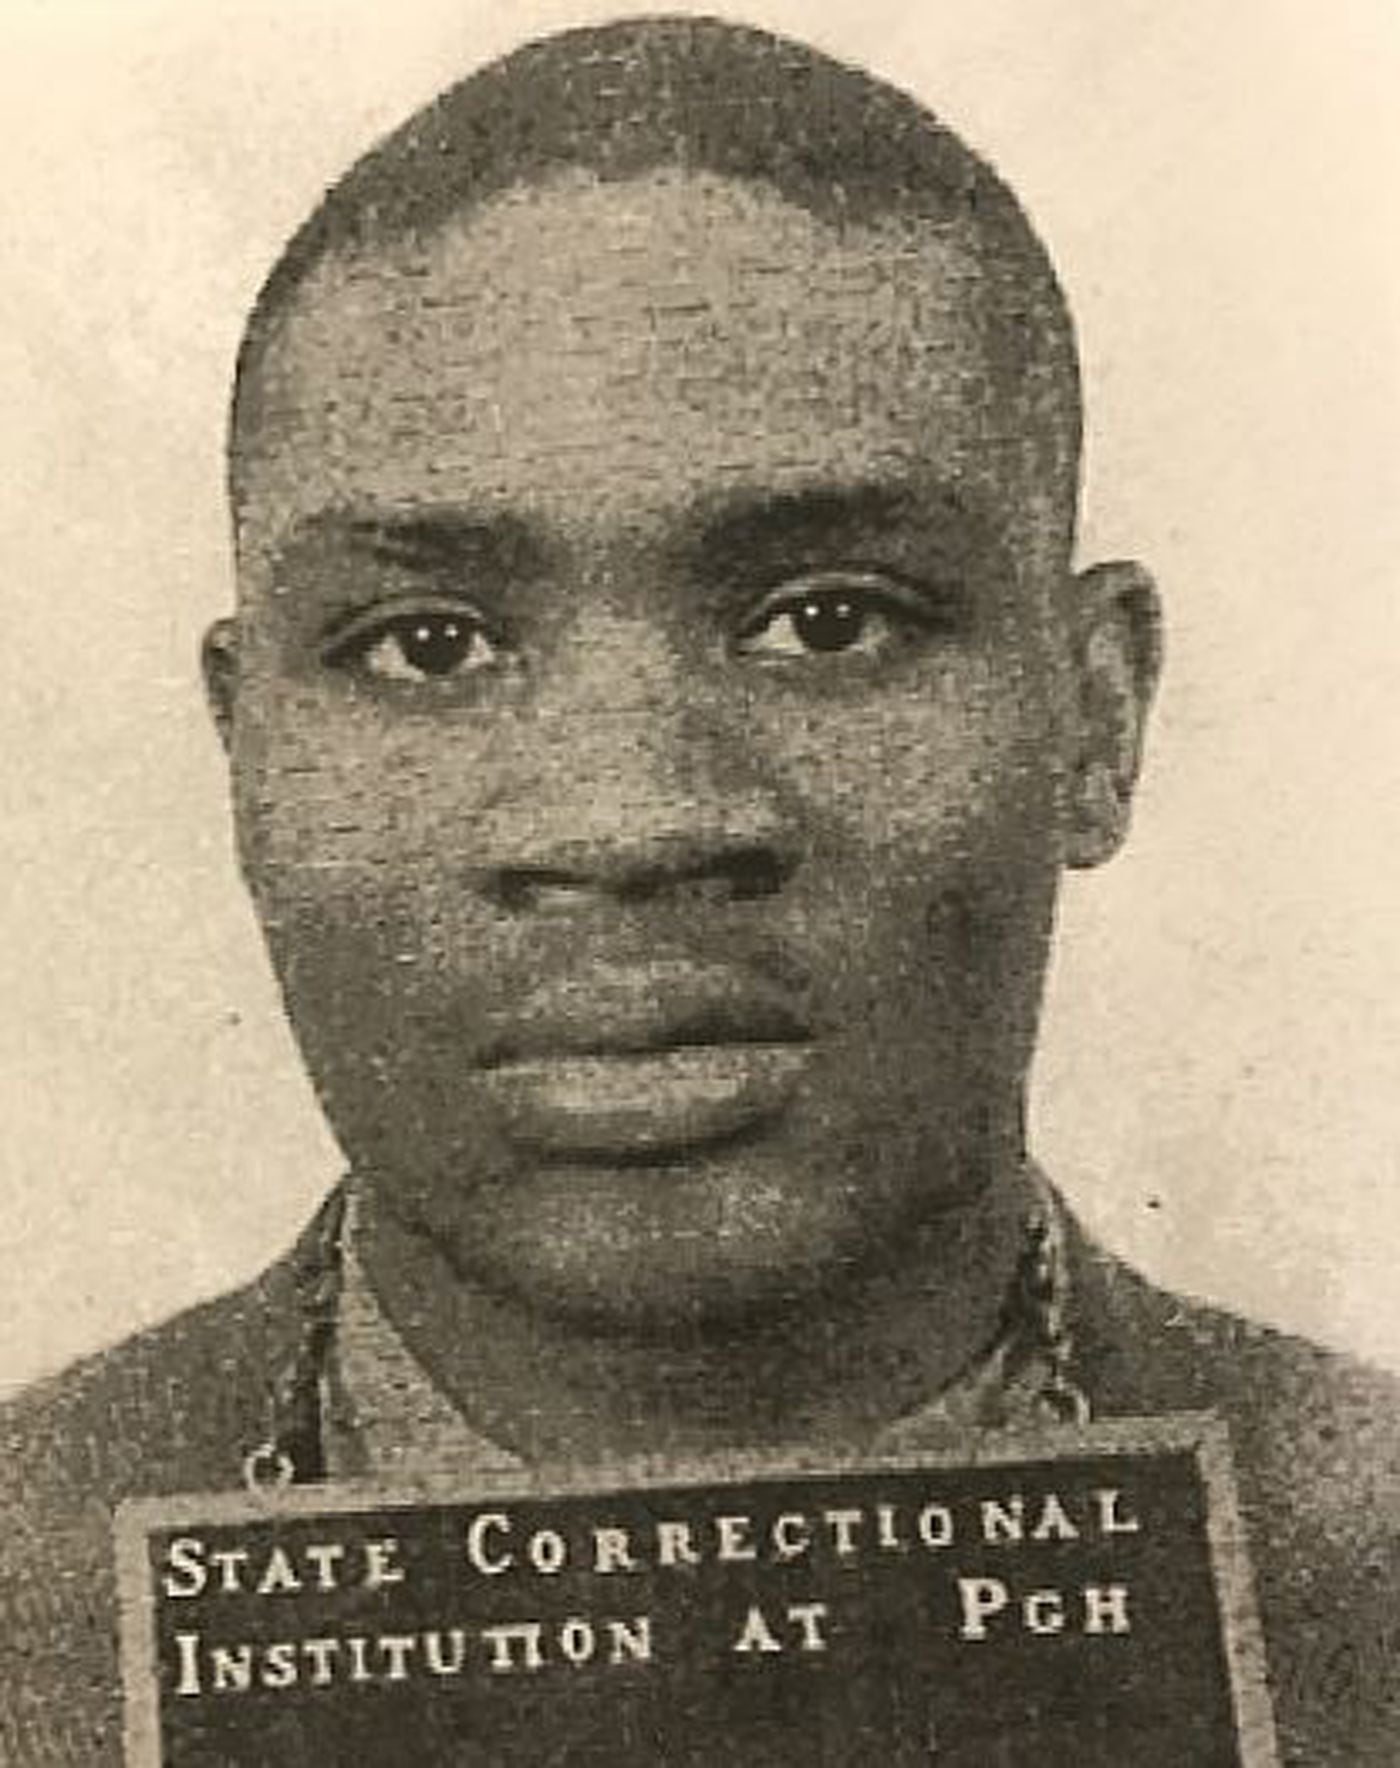 Joseph Ligon is seen in an undated prison photo from State Correctional Institution Pittsburgh.